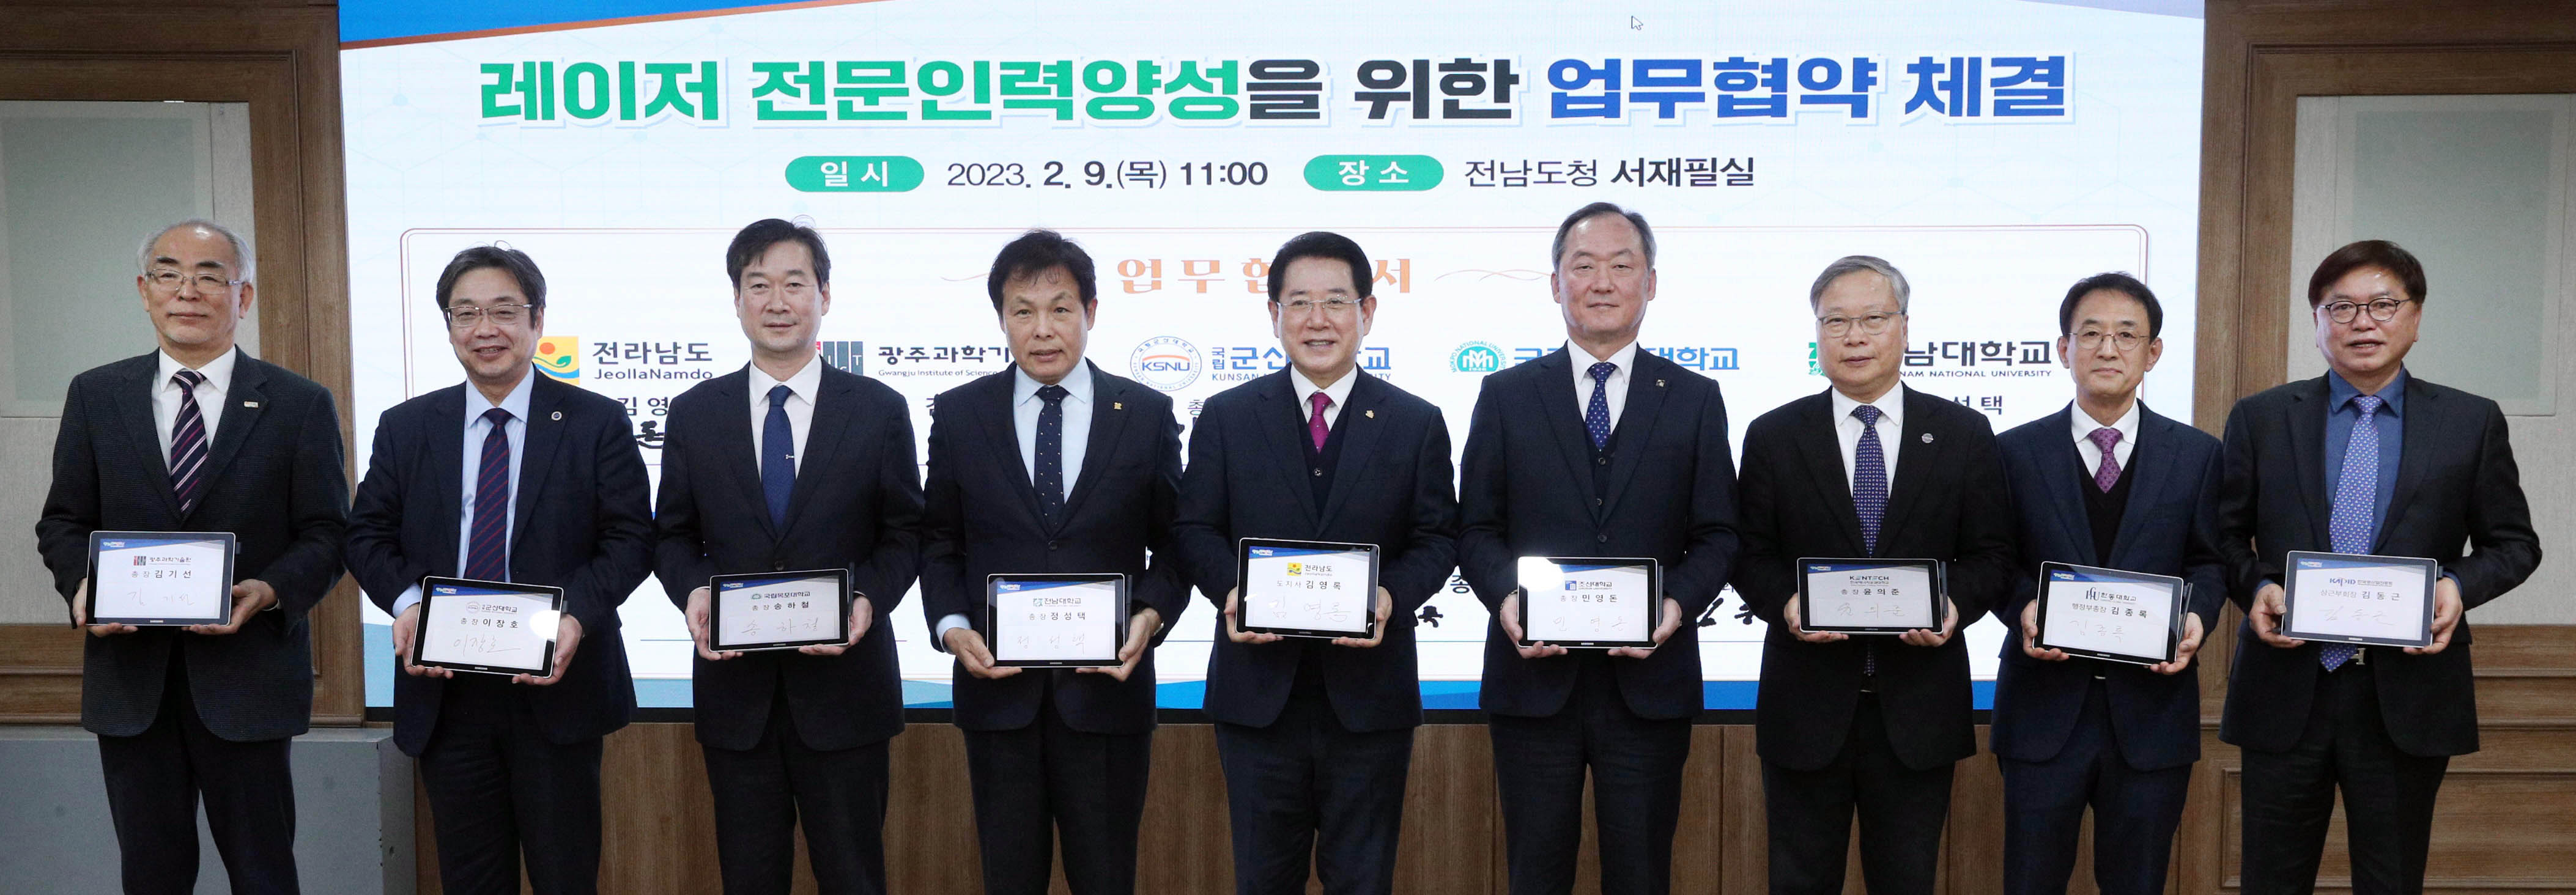 7 universities including GIST - Jeollanam-do - industry signed an agreement to train ‘the world’s largest’ super-powerful laser experts in Jeollanam-do 이미지